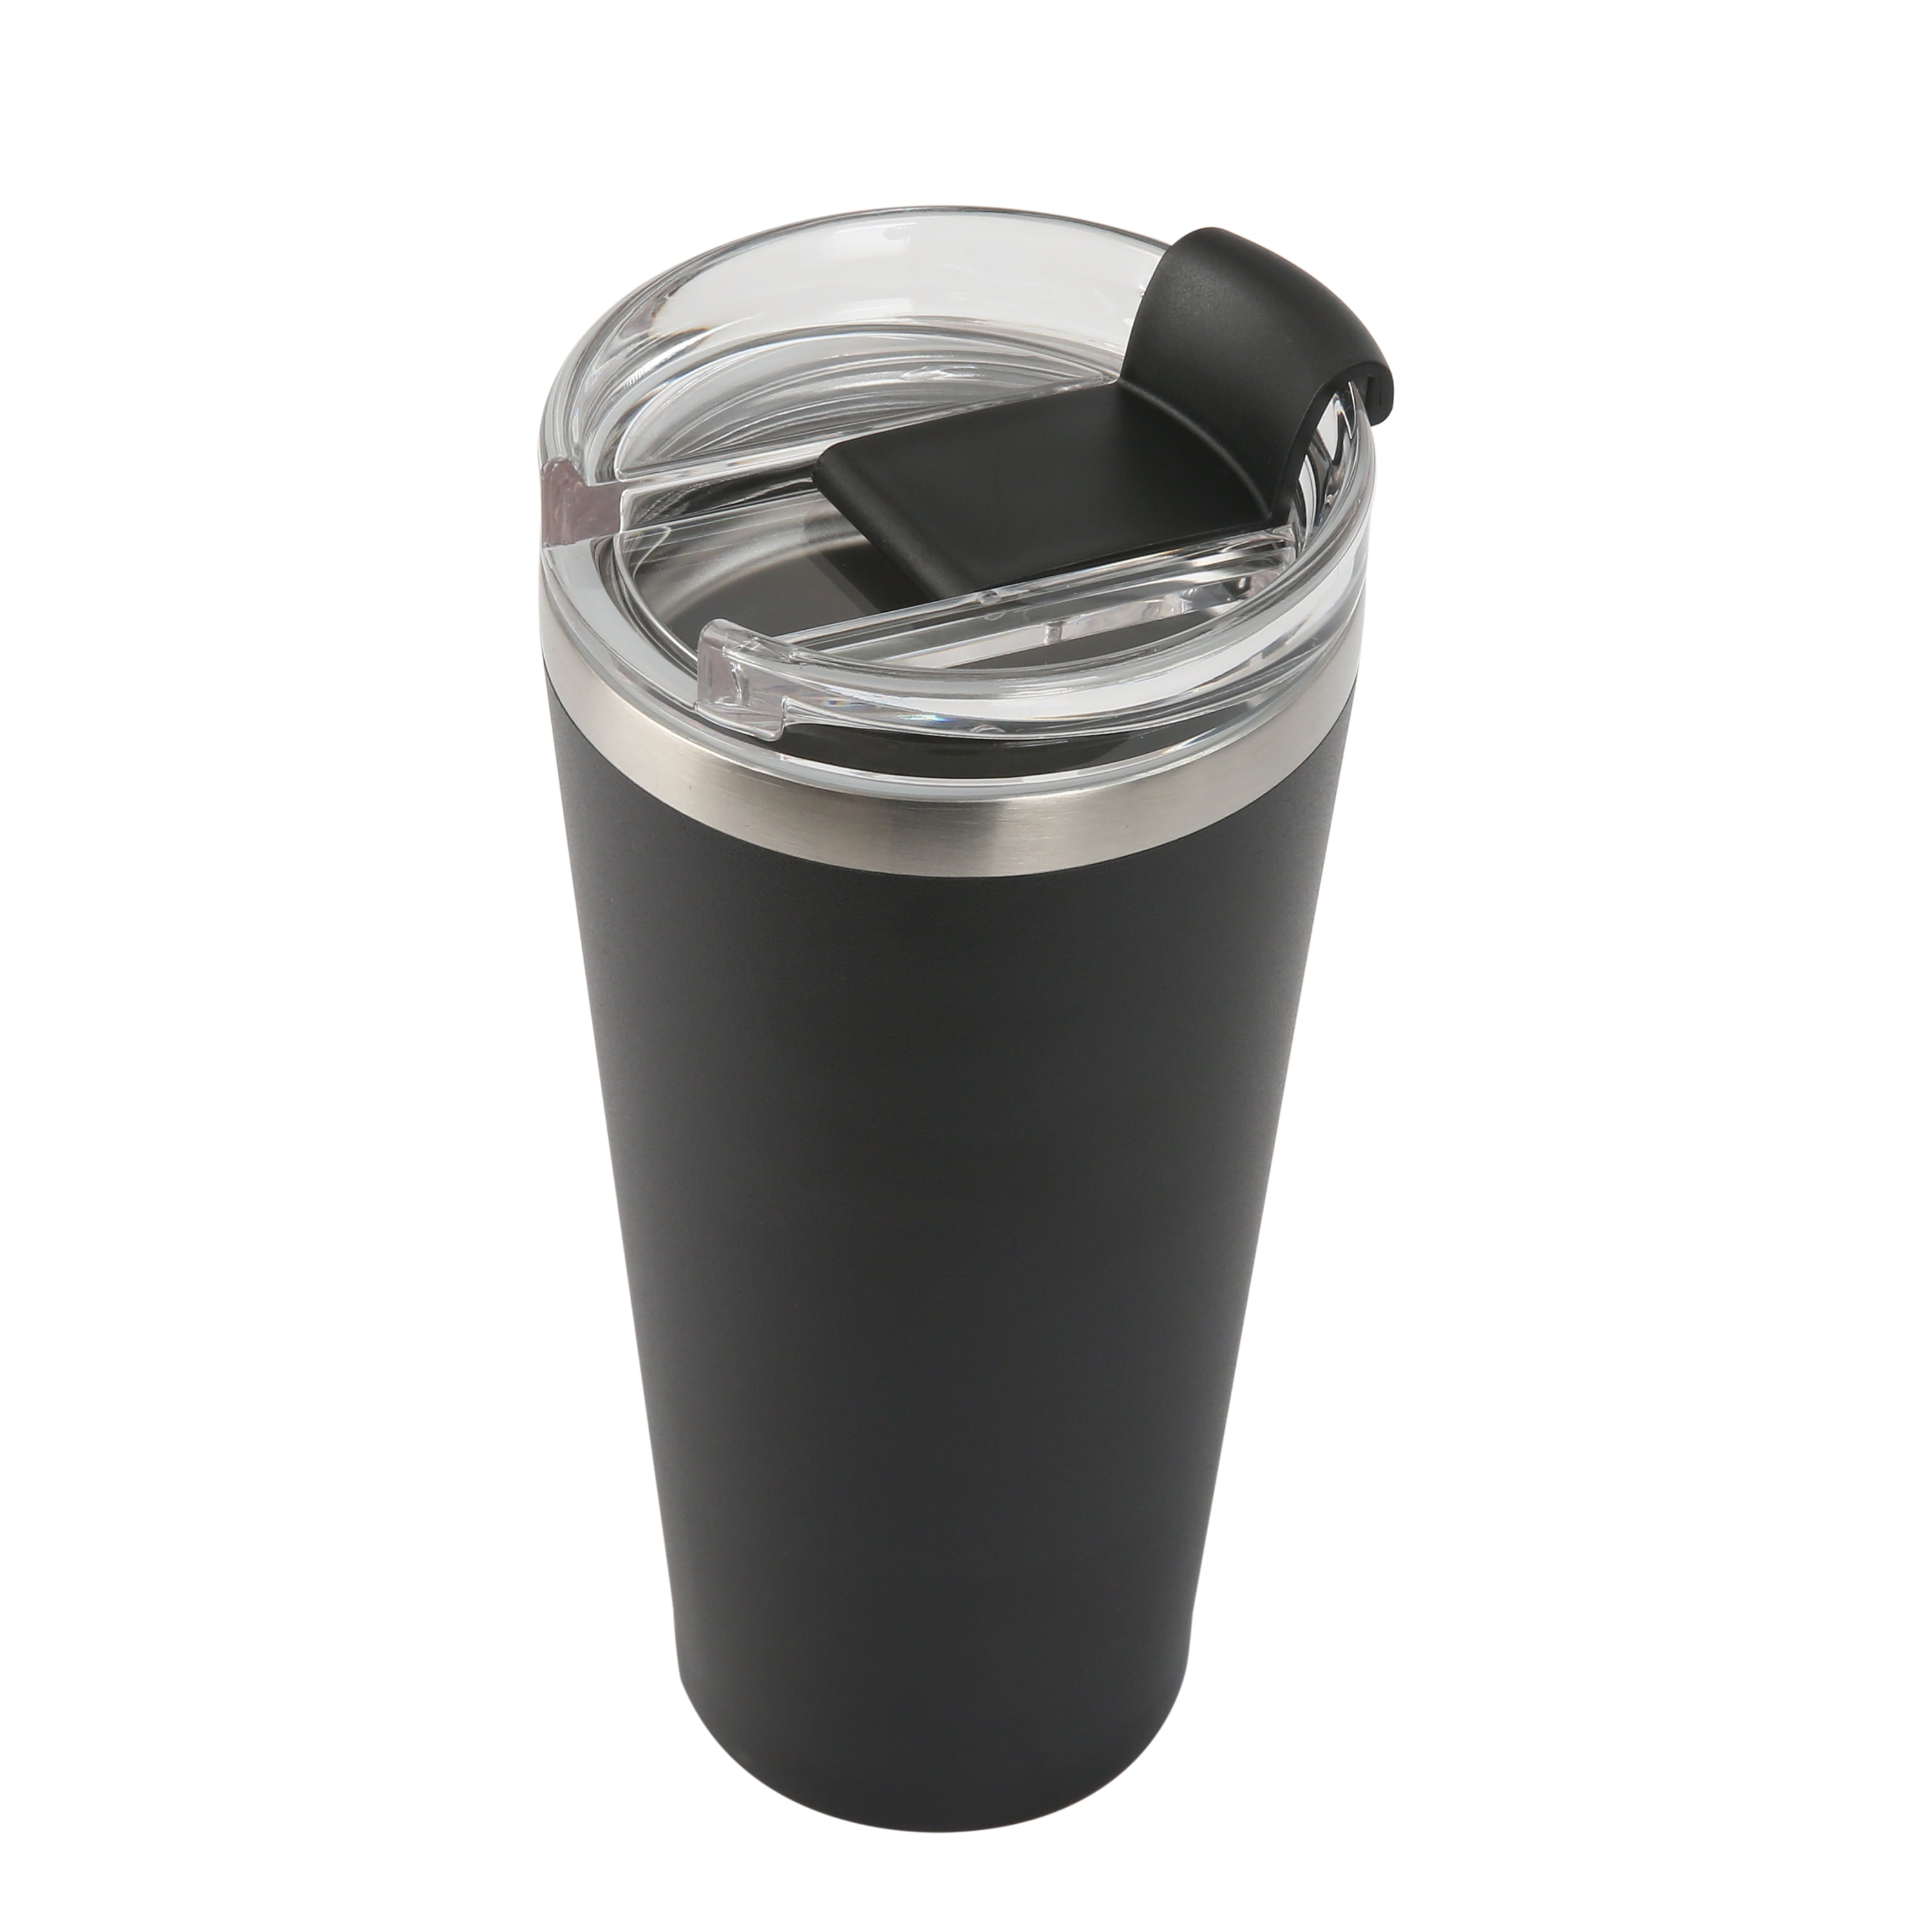 Mainstays Iced Coffee Maker with Reusable Tumbler & Filter - Black - 20 fl oz